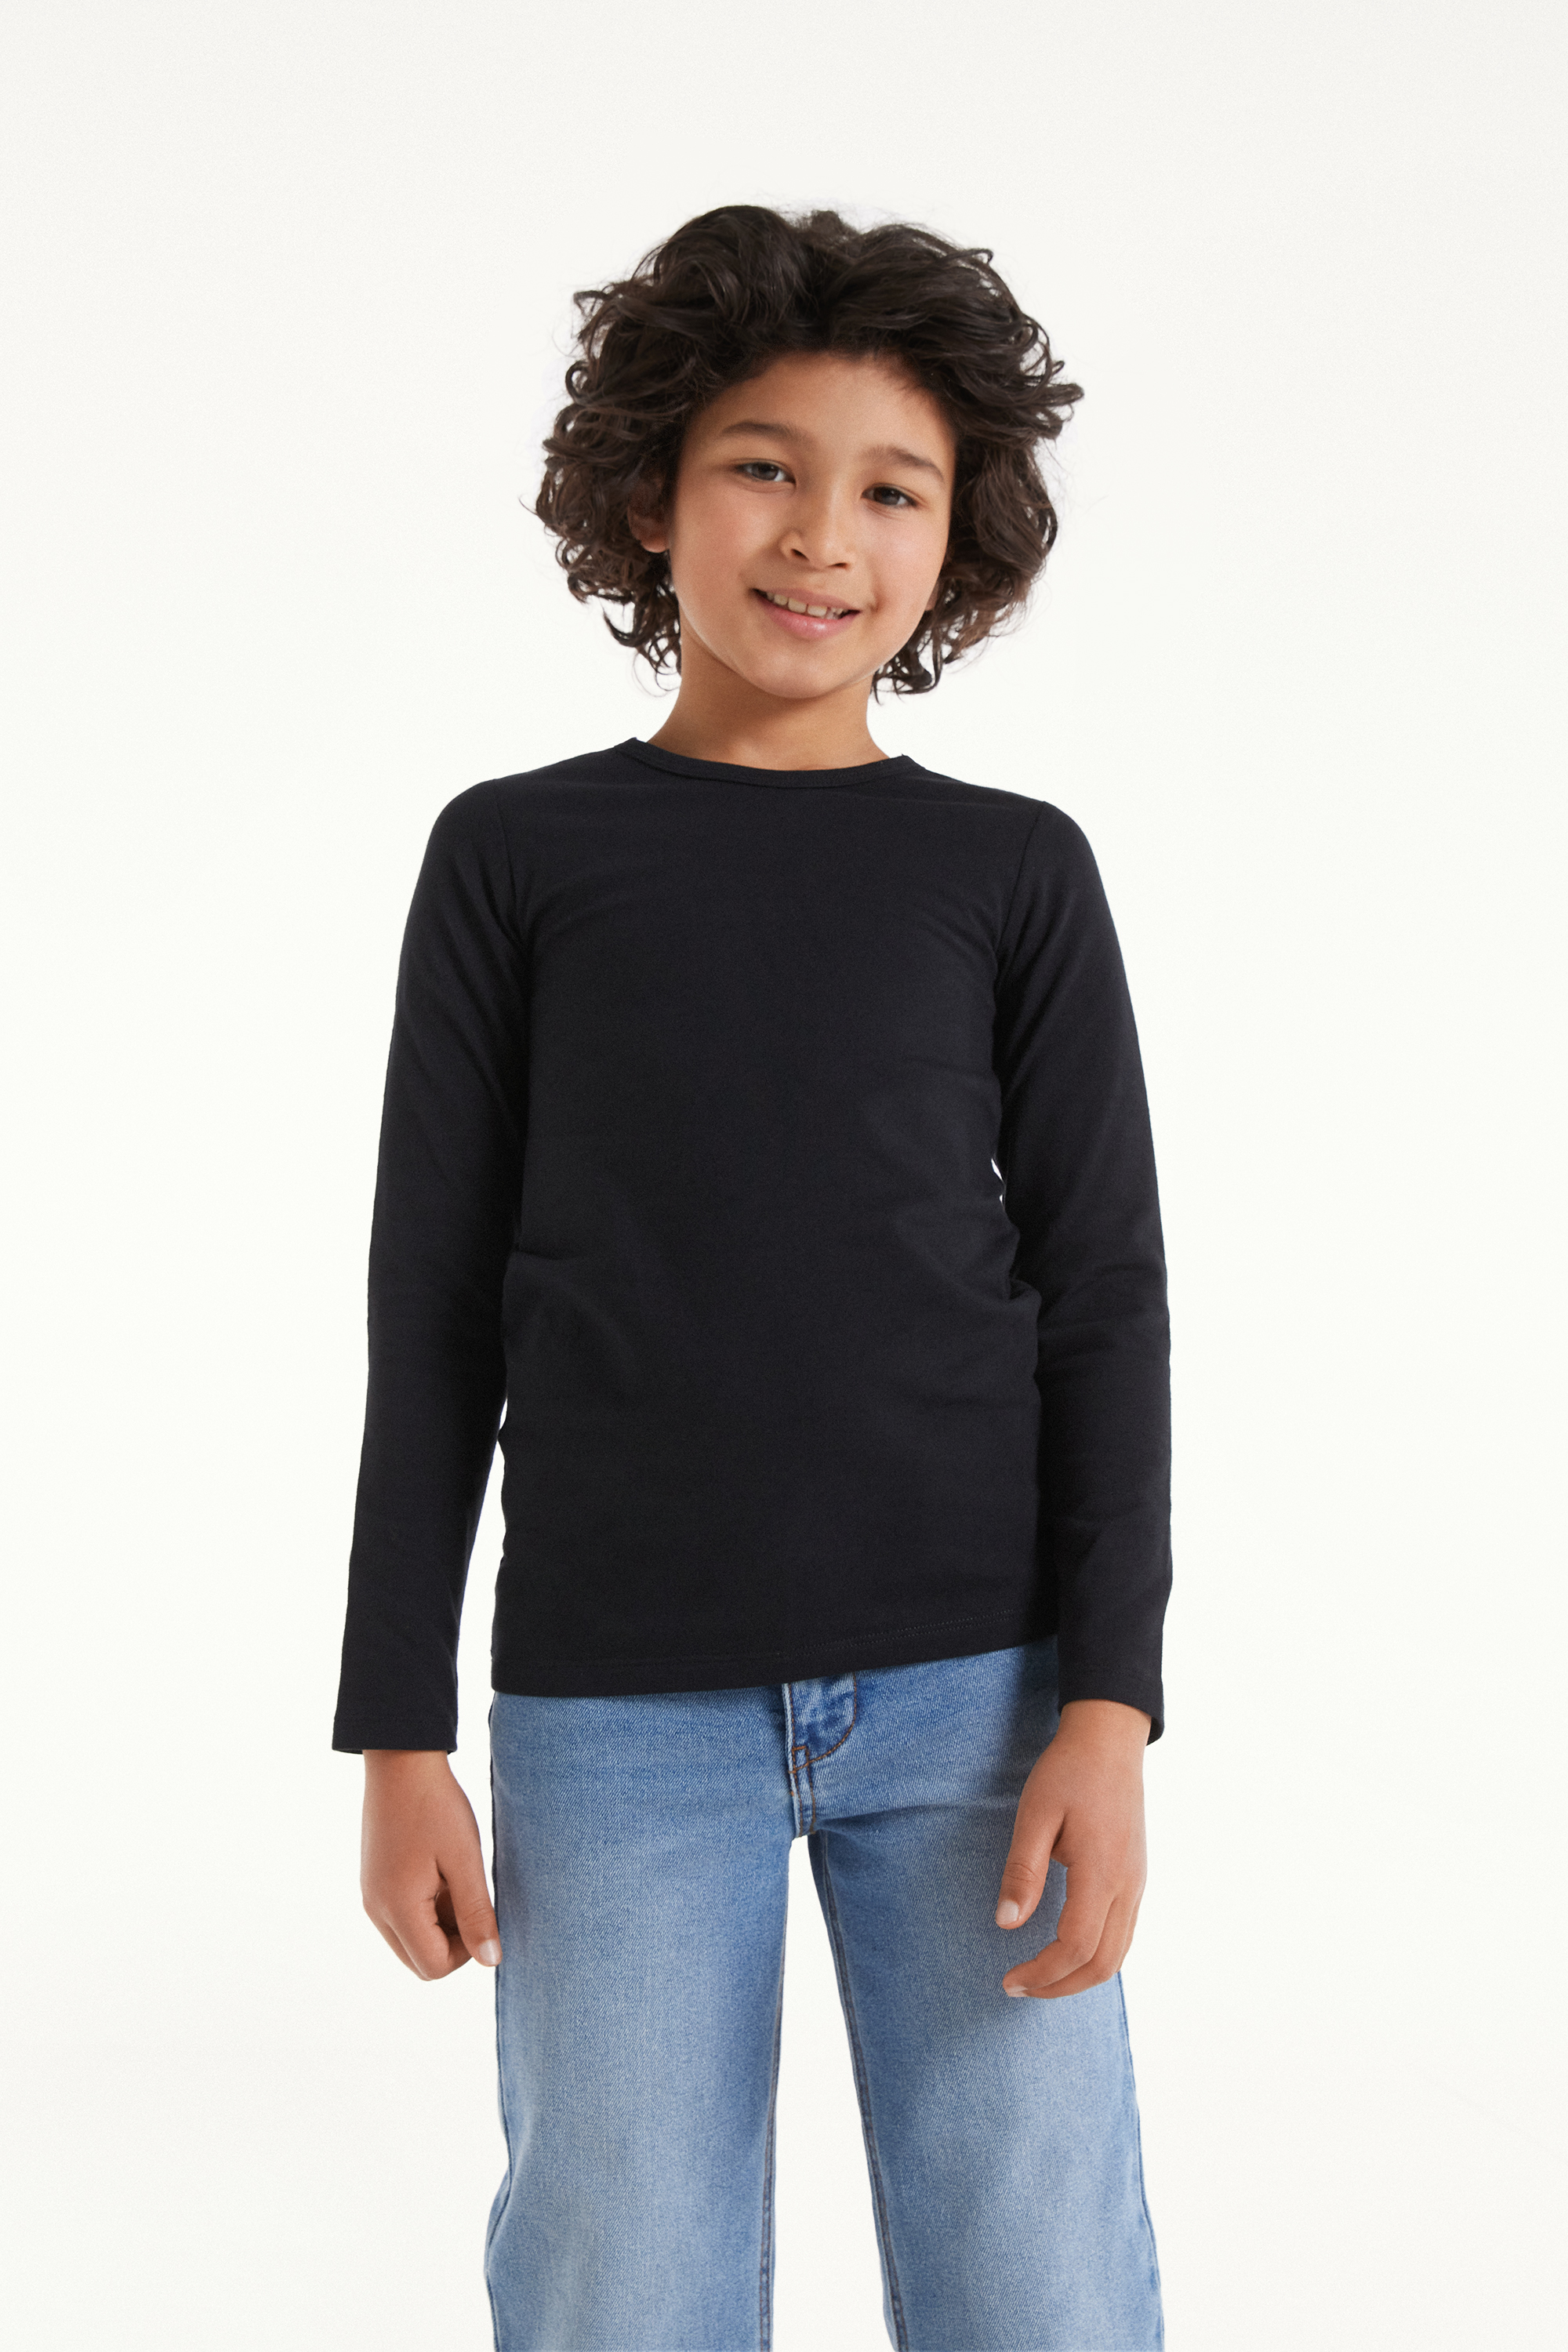 Kids’ Unisex Long-Sleeved Rounded Neck Thermal Cotton Top